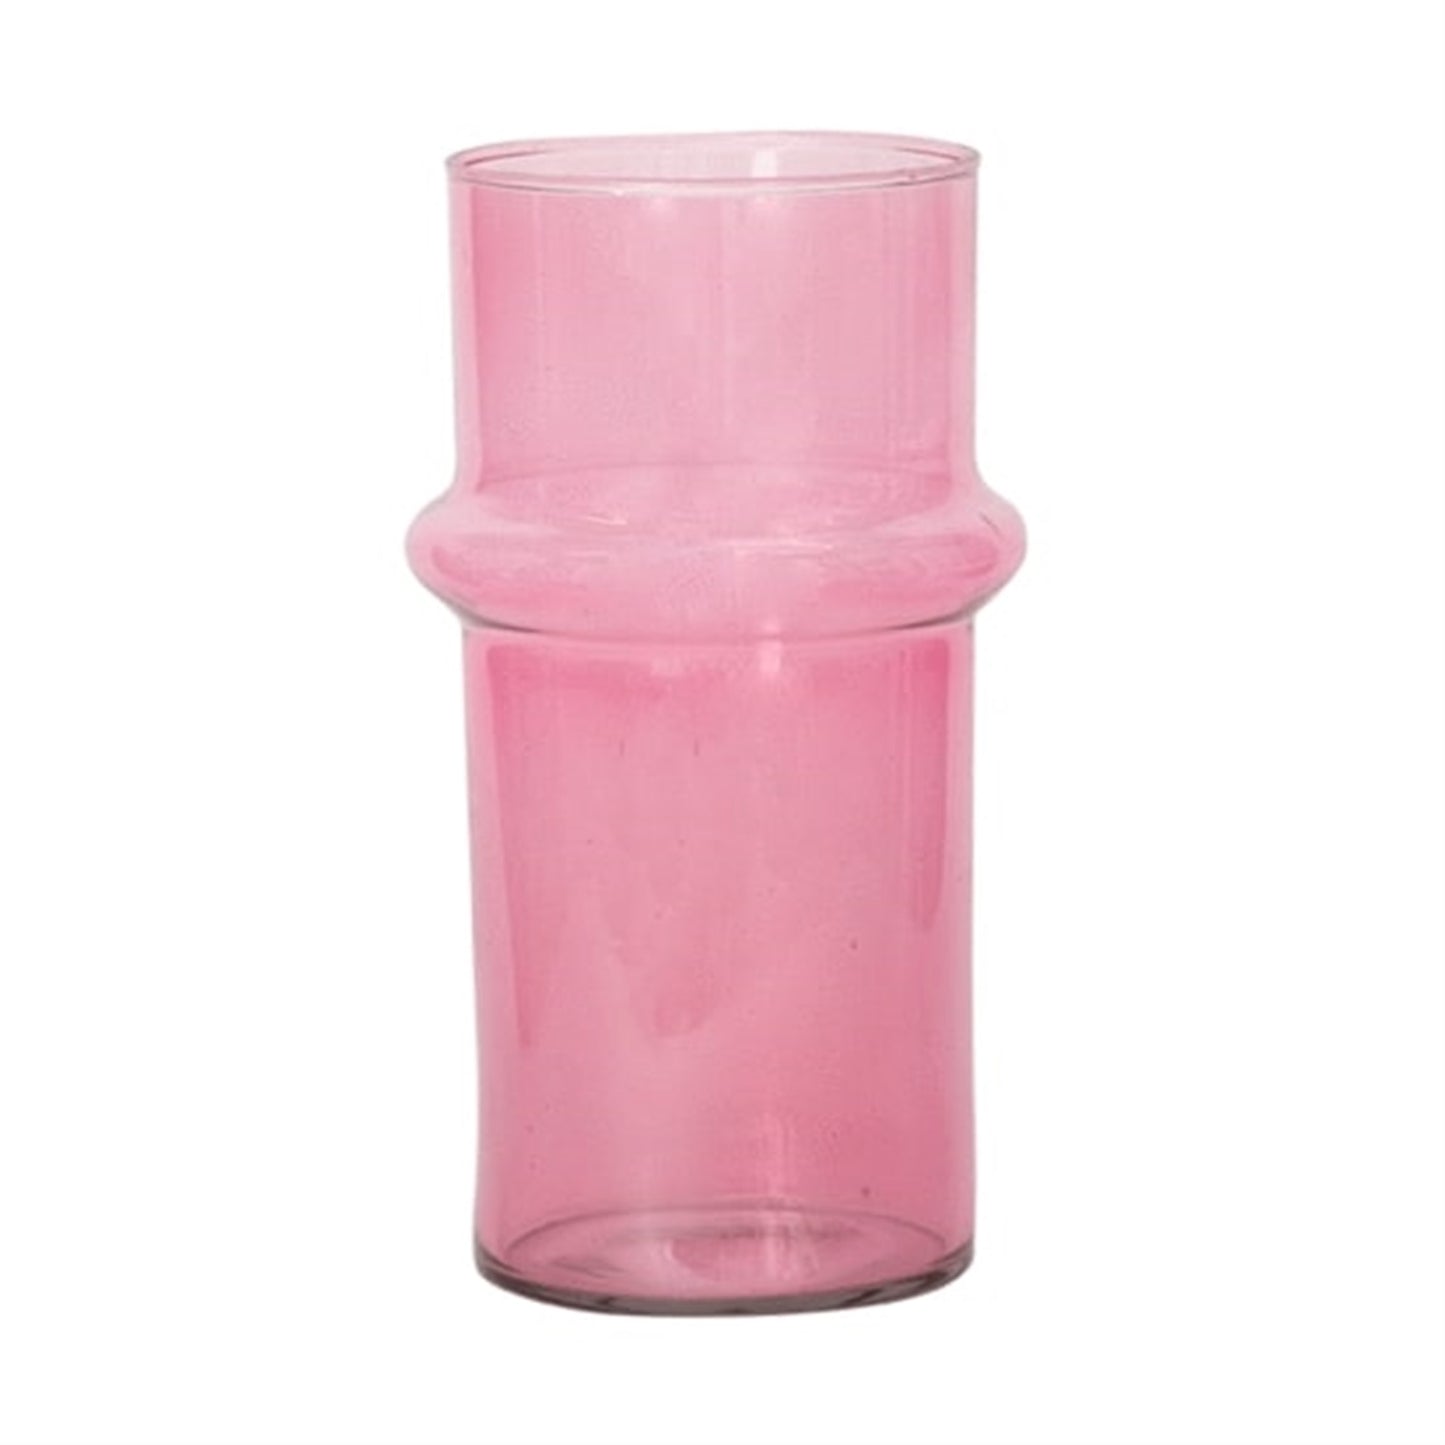 Recycled Glass Vase- Pink